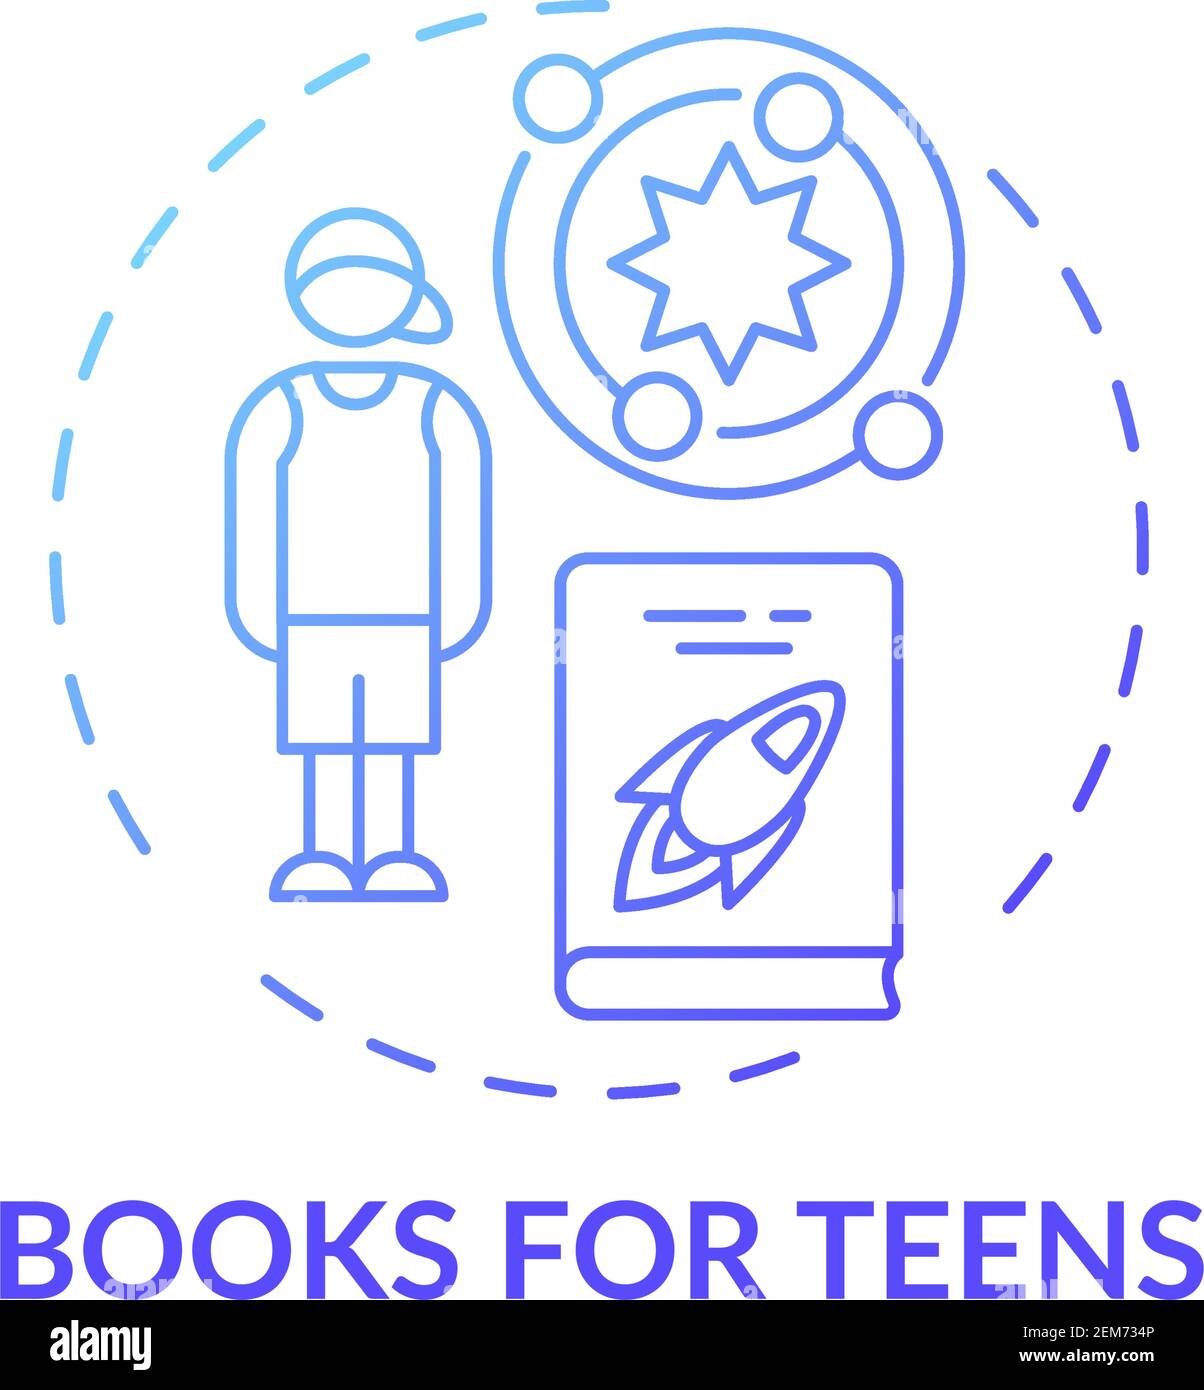 Books for teens concept icon Stock Vector